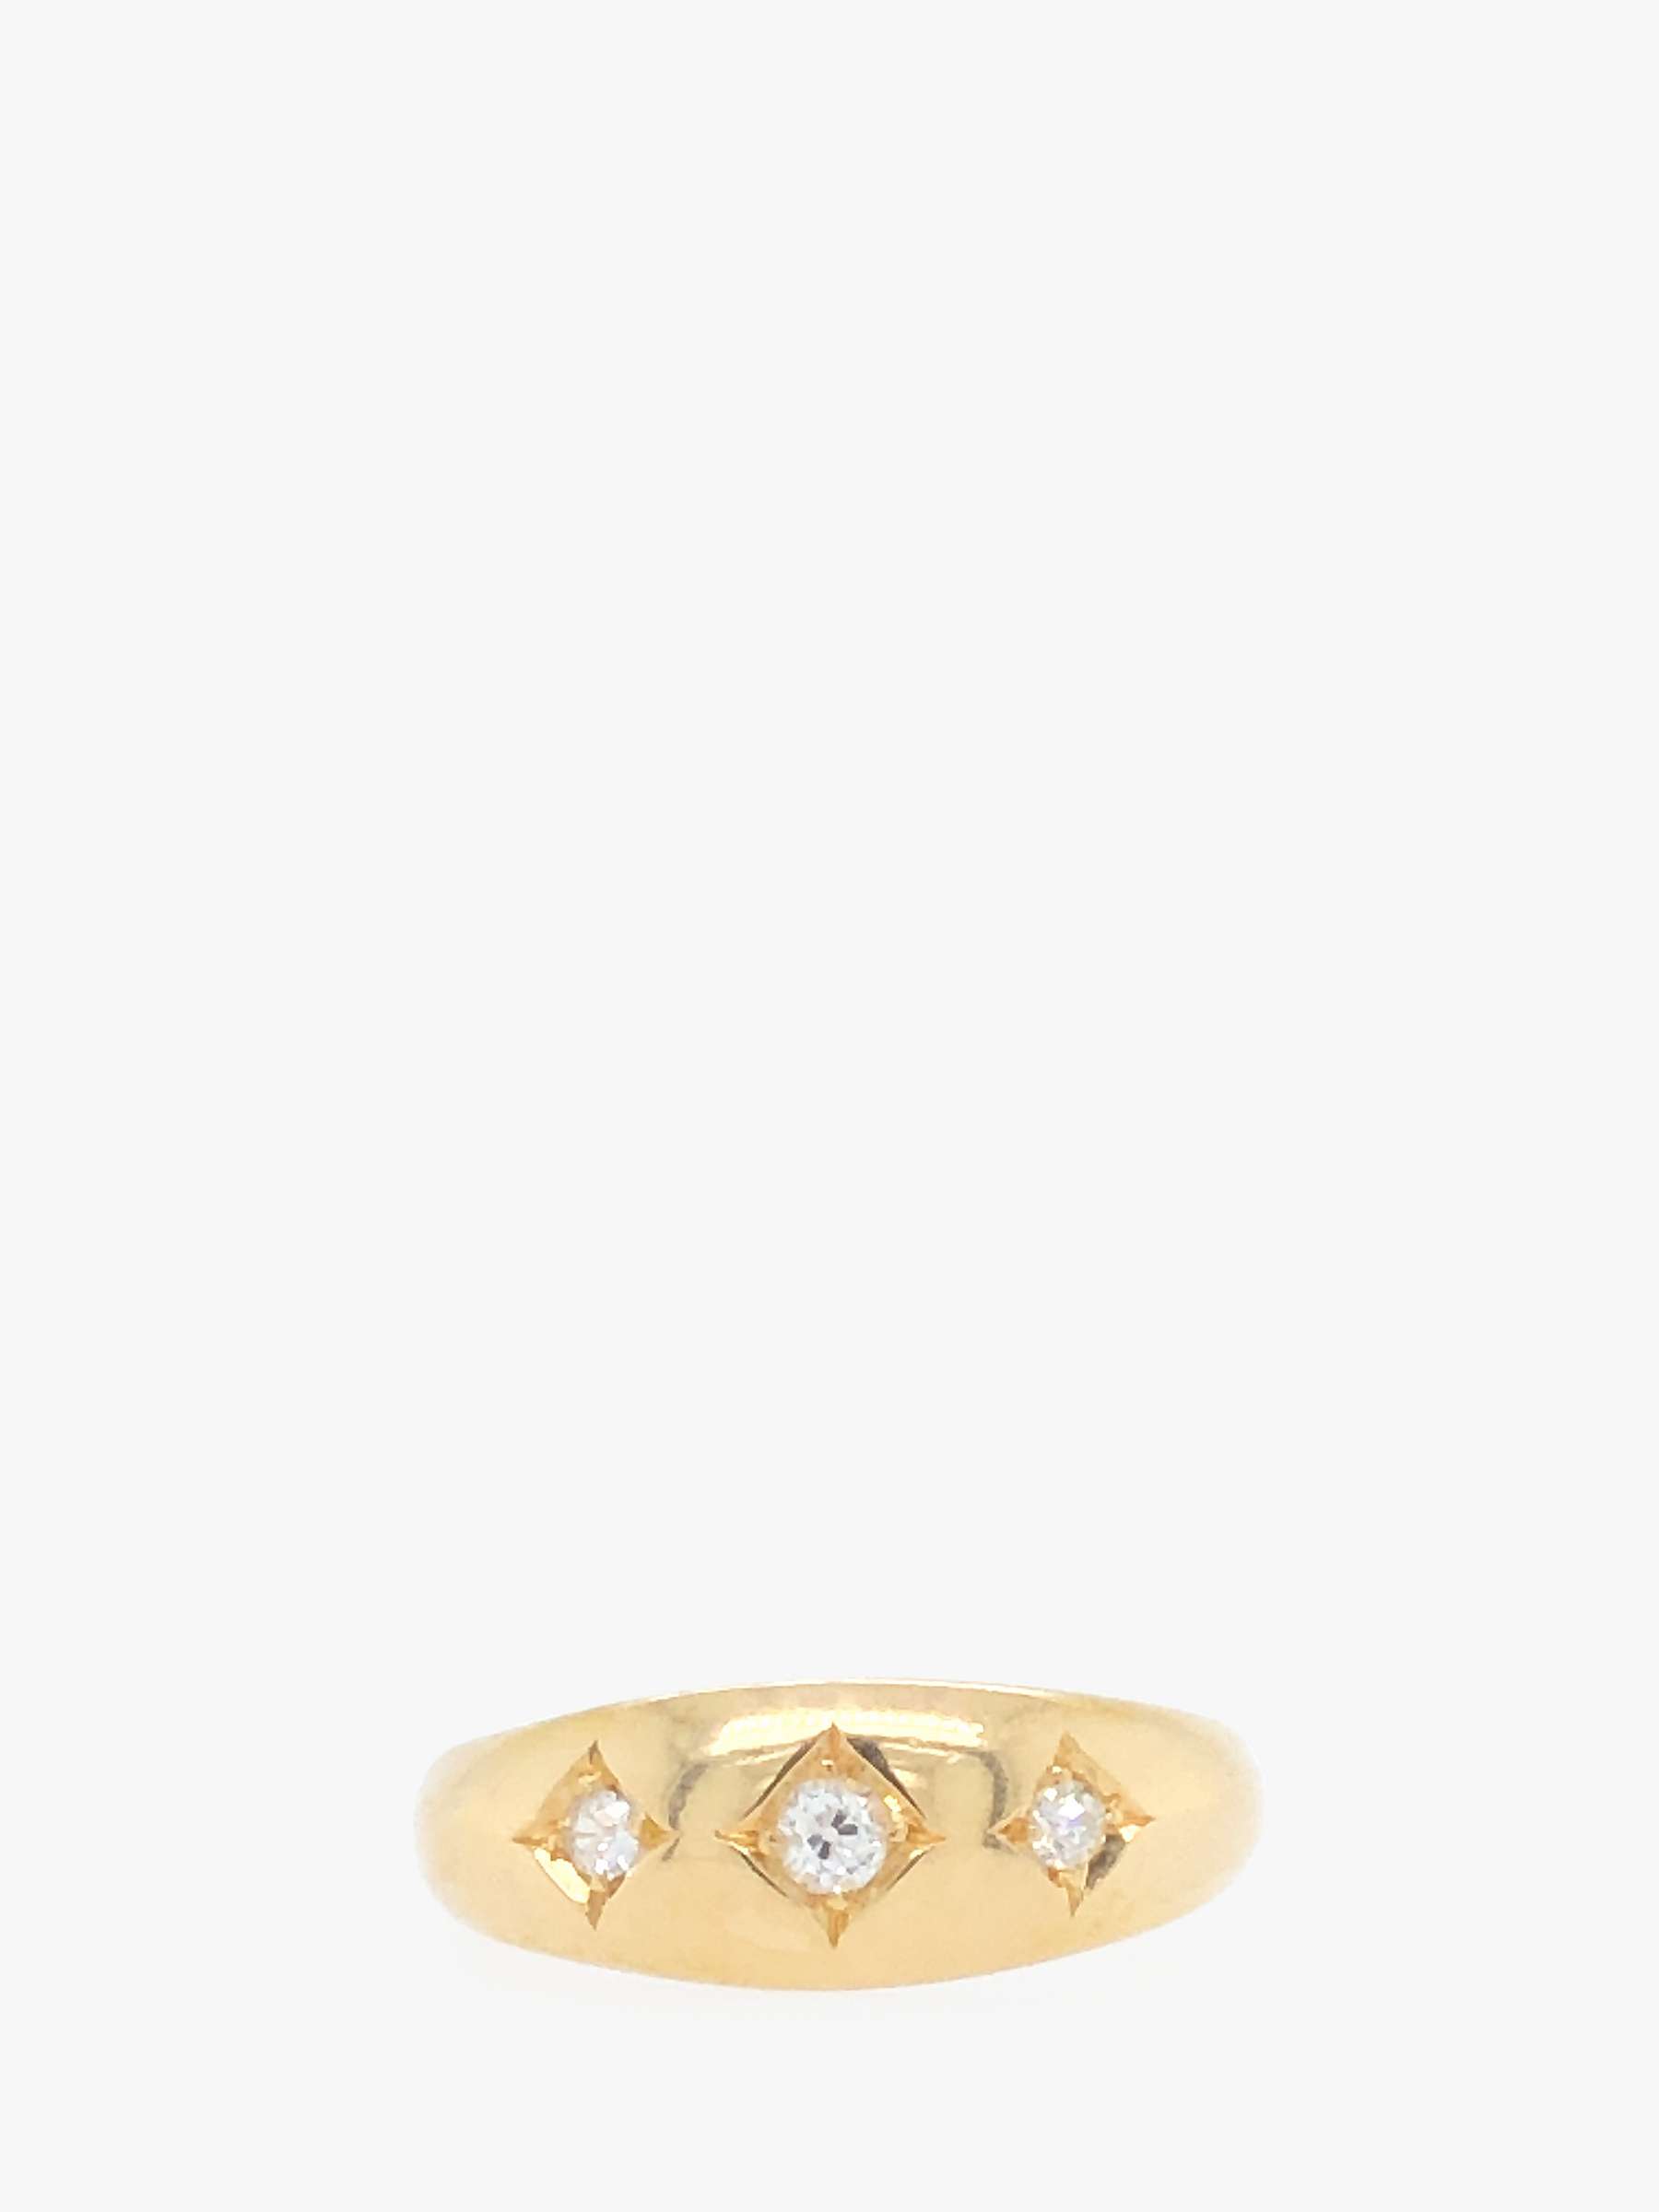 Buy VF Jewellery 18ct Yellow Gold 3 Diamond Second Hand Ring Online at johnlewis.com